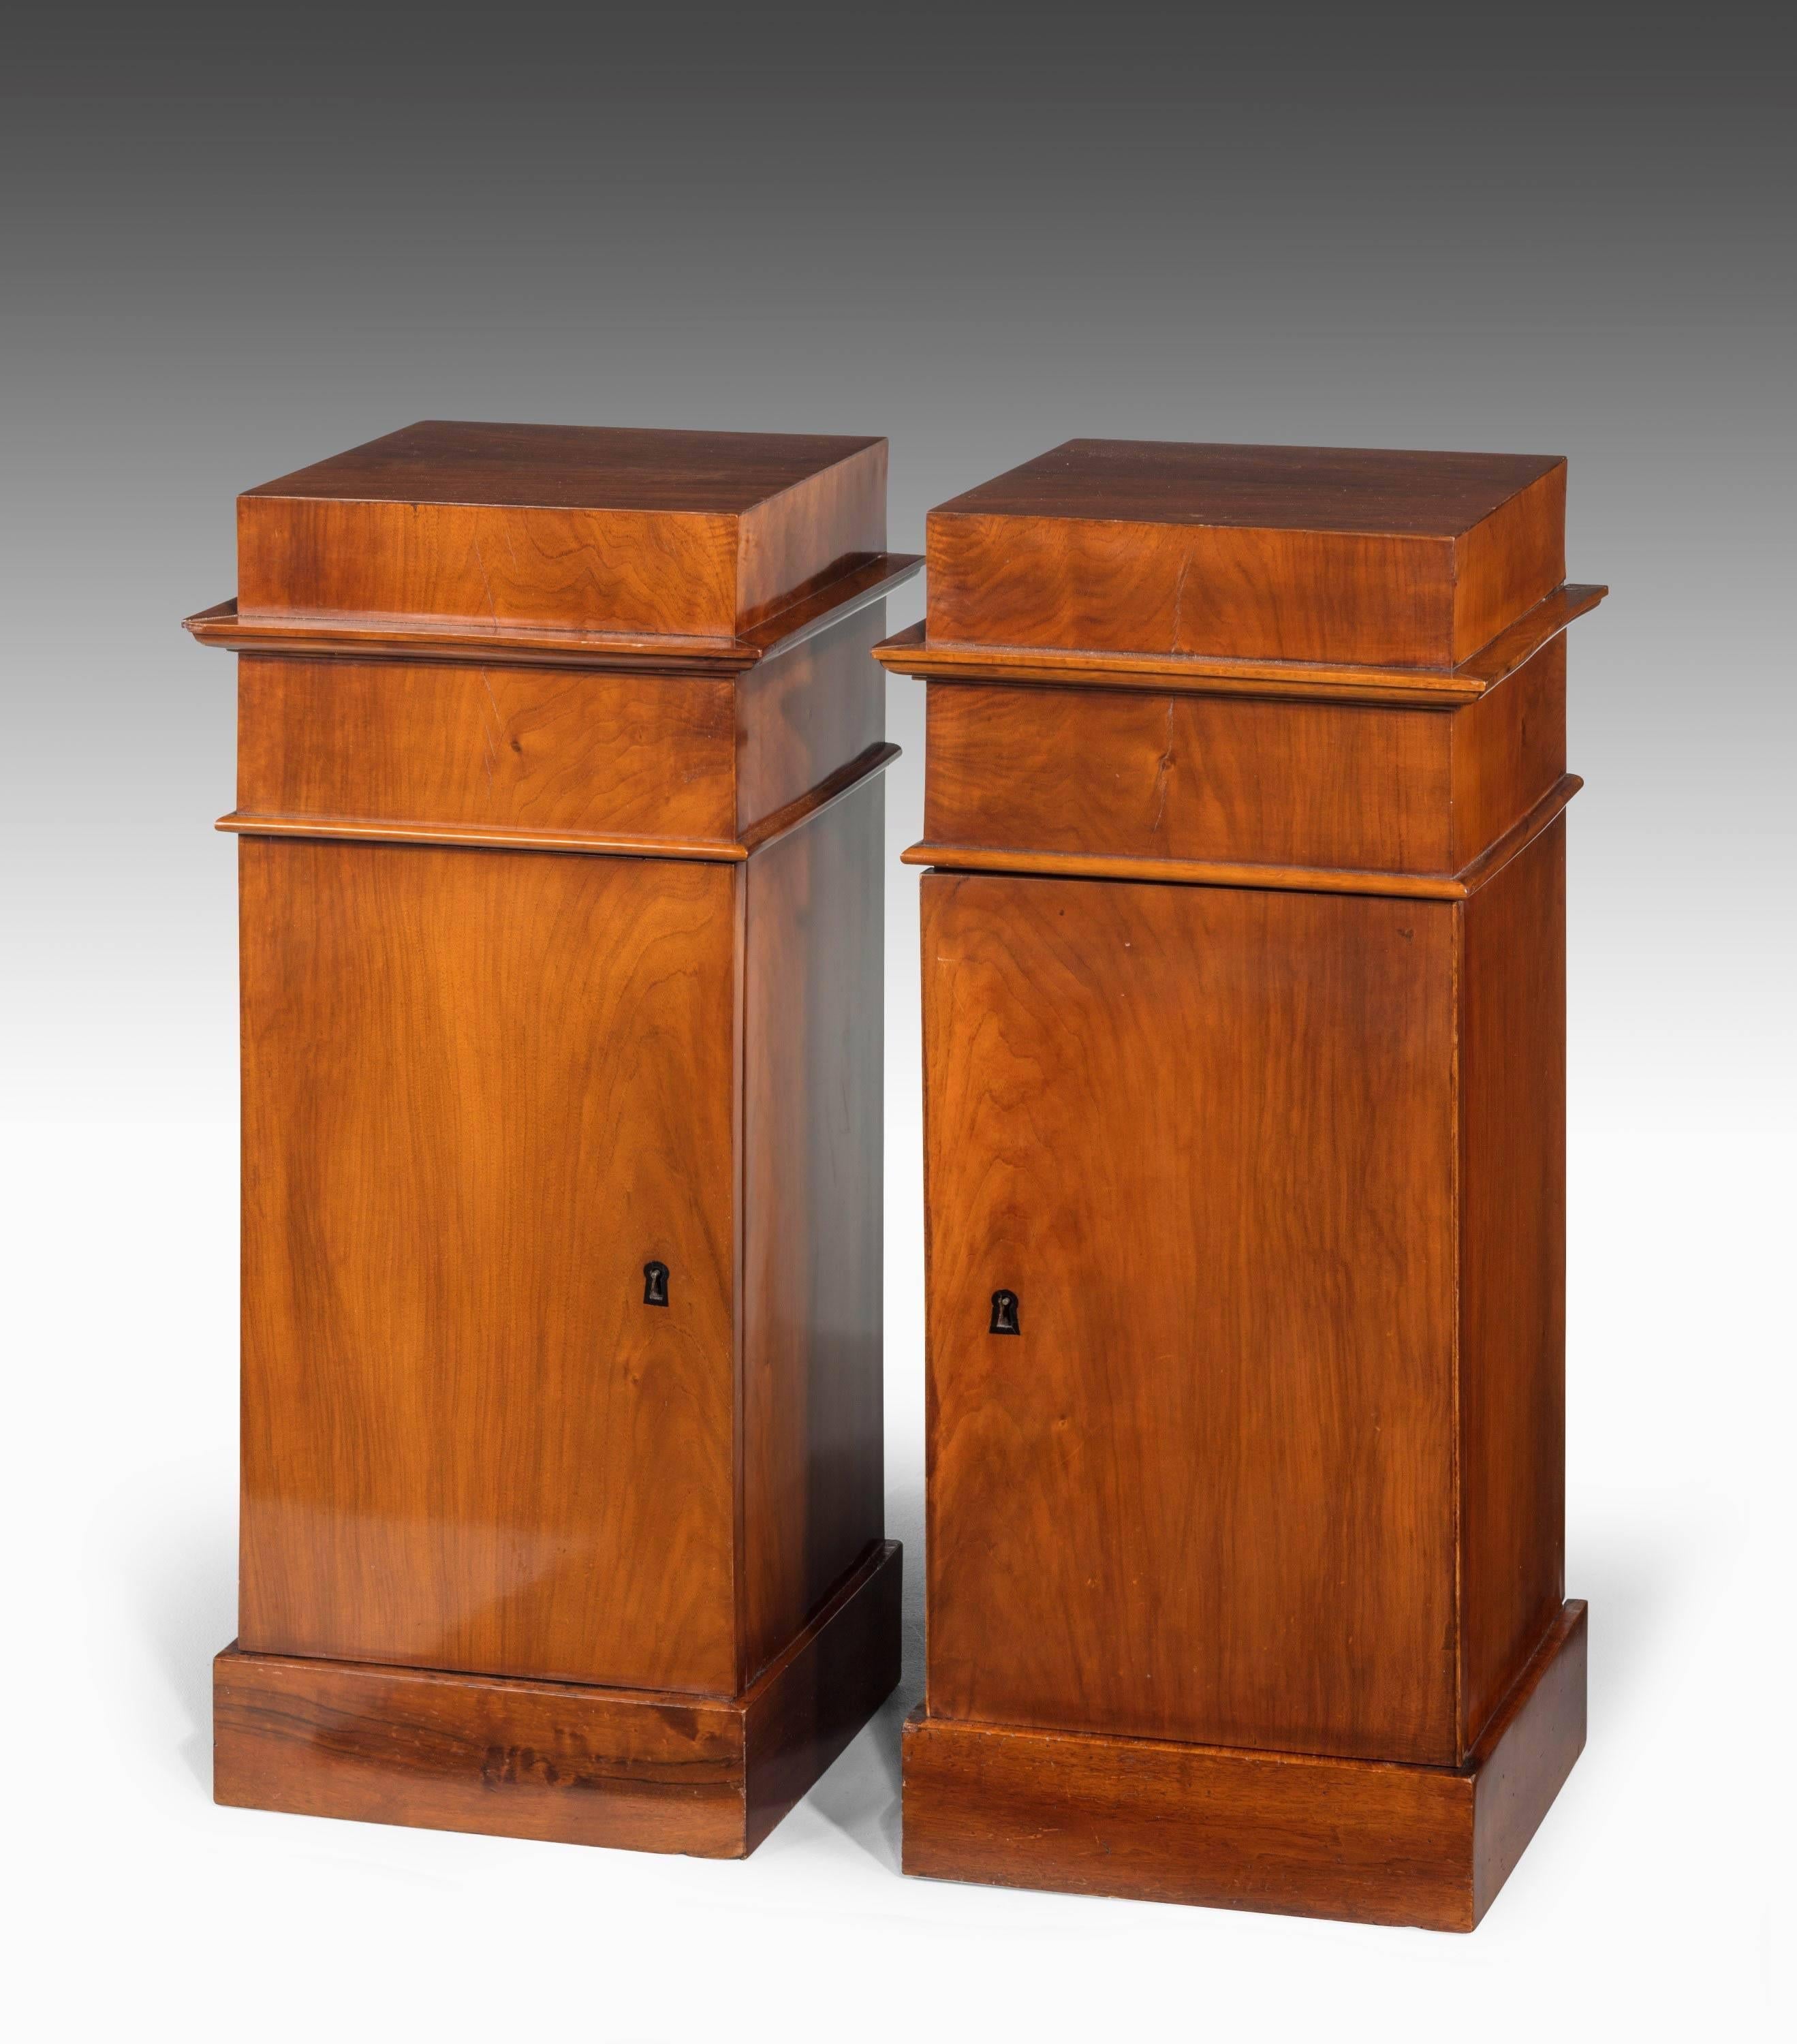 A very good pair of early 20th century mahogany pot cupboards of pillar form. Finely figured timber.